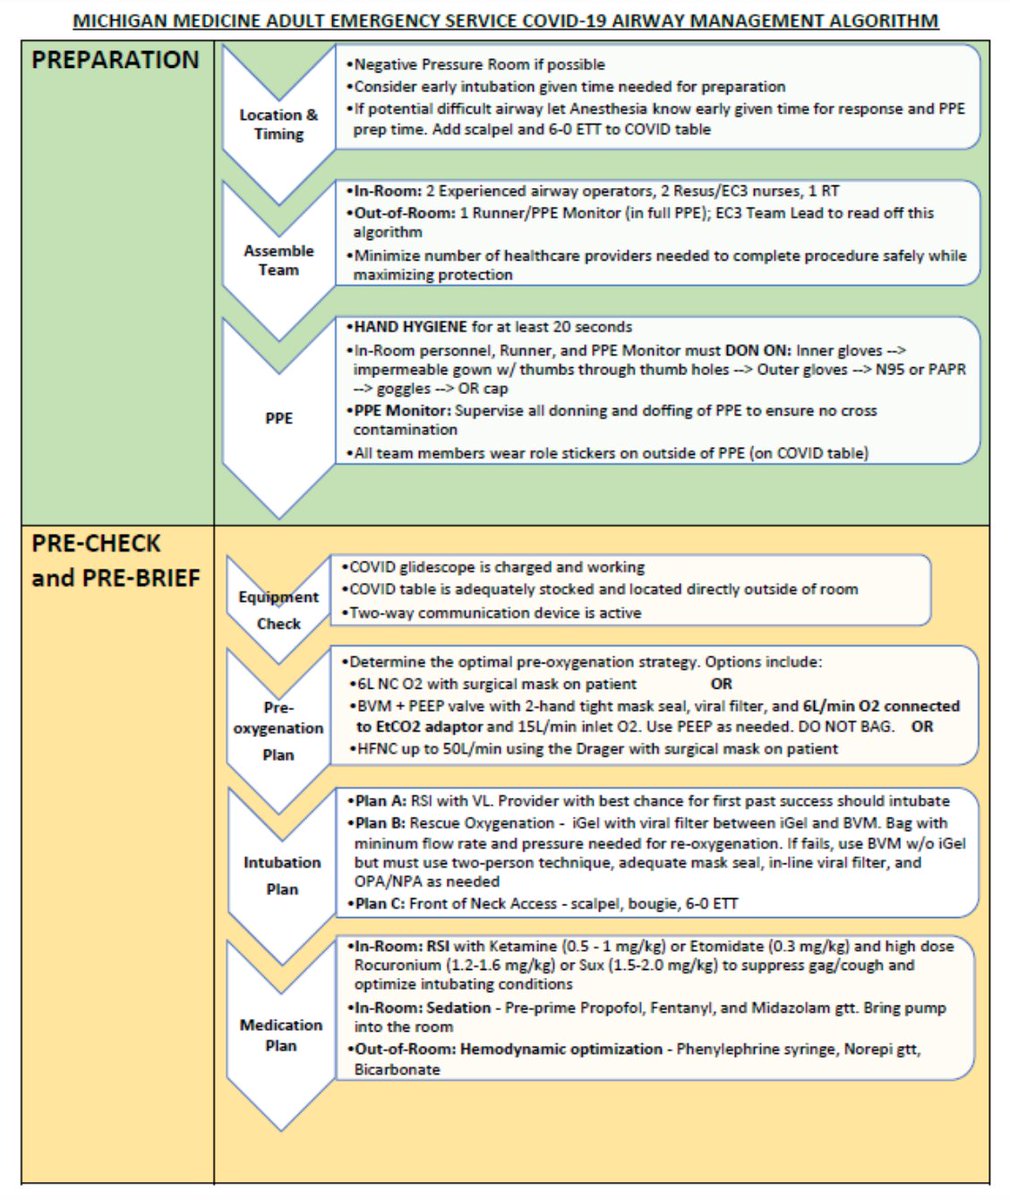 3 /  #COVID19 Emergency Department Airway Management Algorithm  http://www.med.umich.edu/surgery/mcccn/   #MedED  #FOAMed